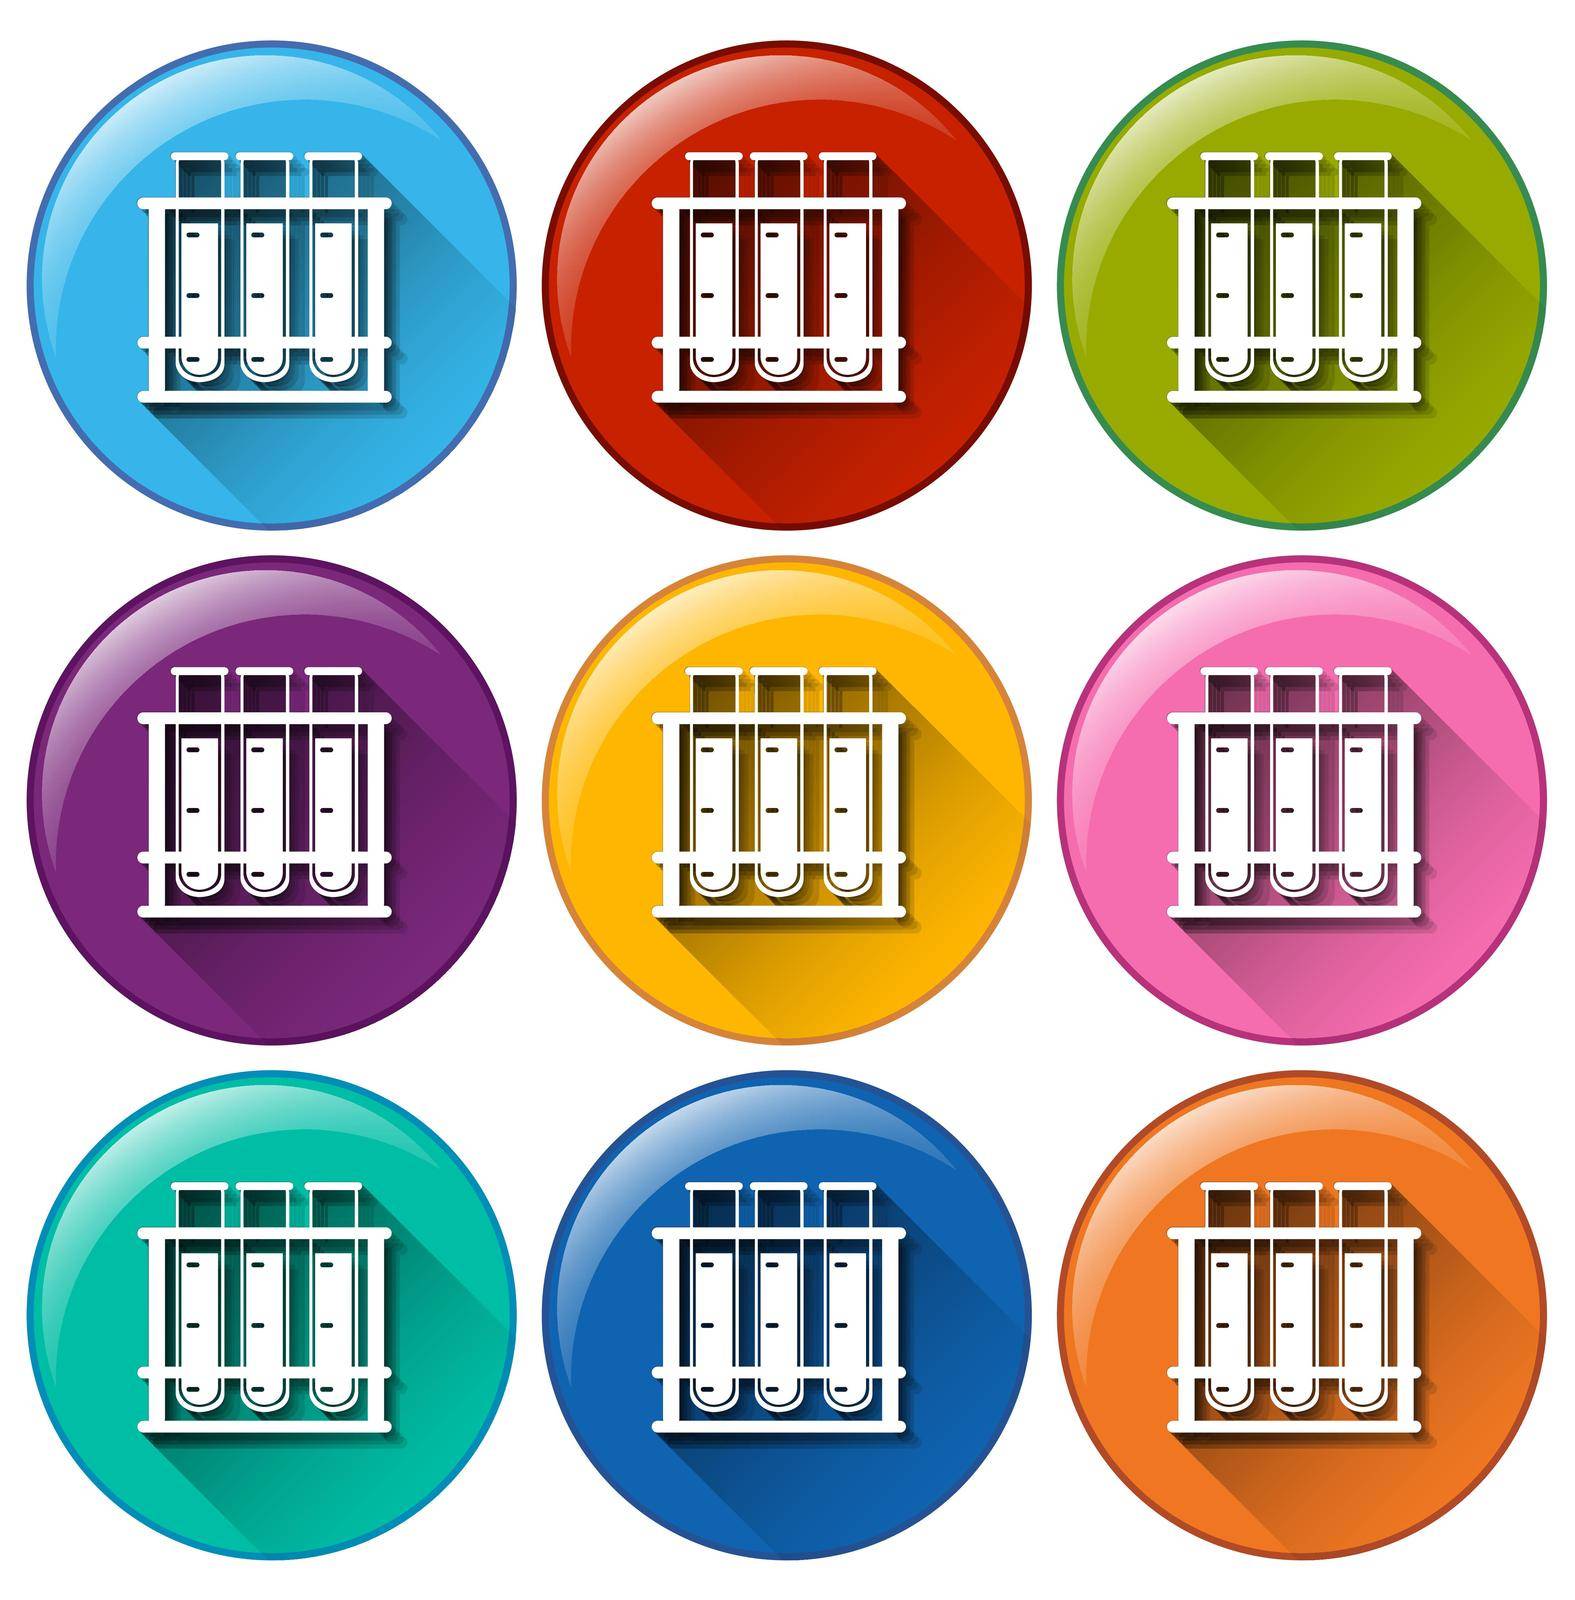 Illustration of the round icons with testtubes in a rack on a white background